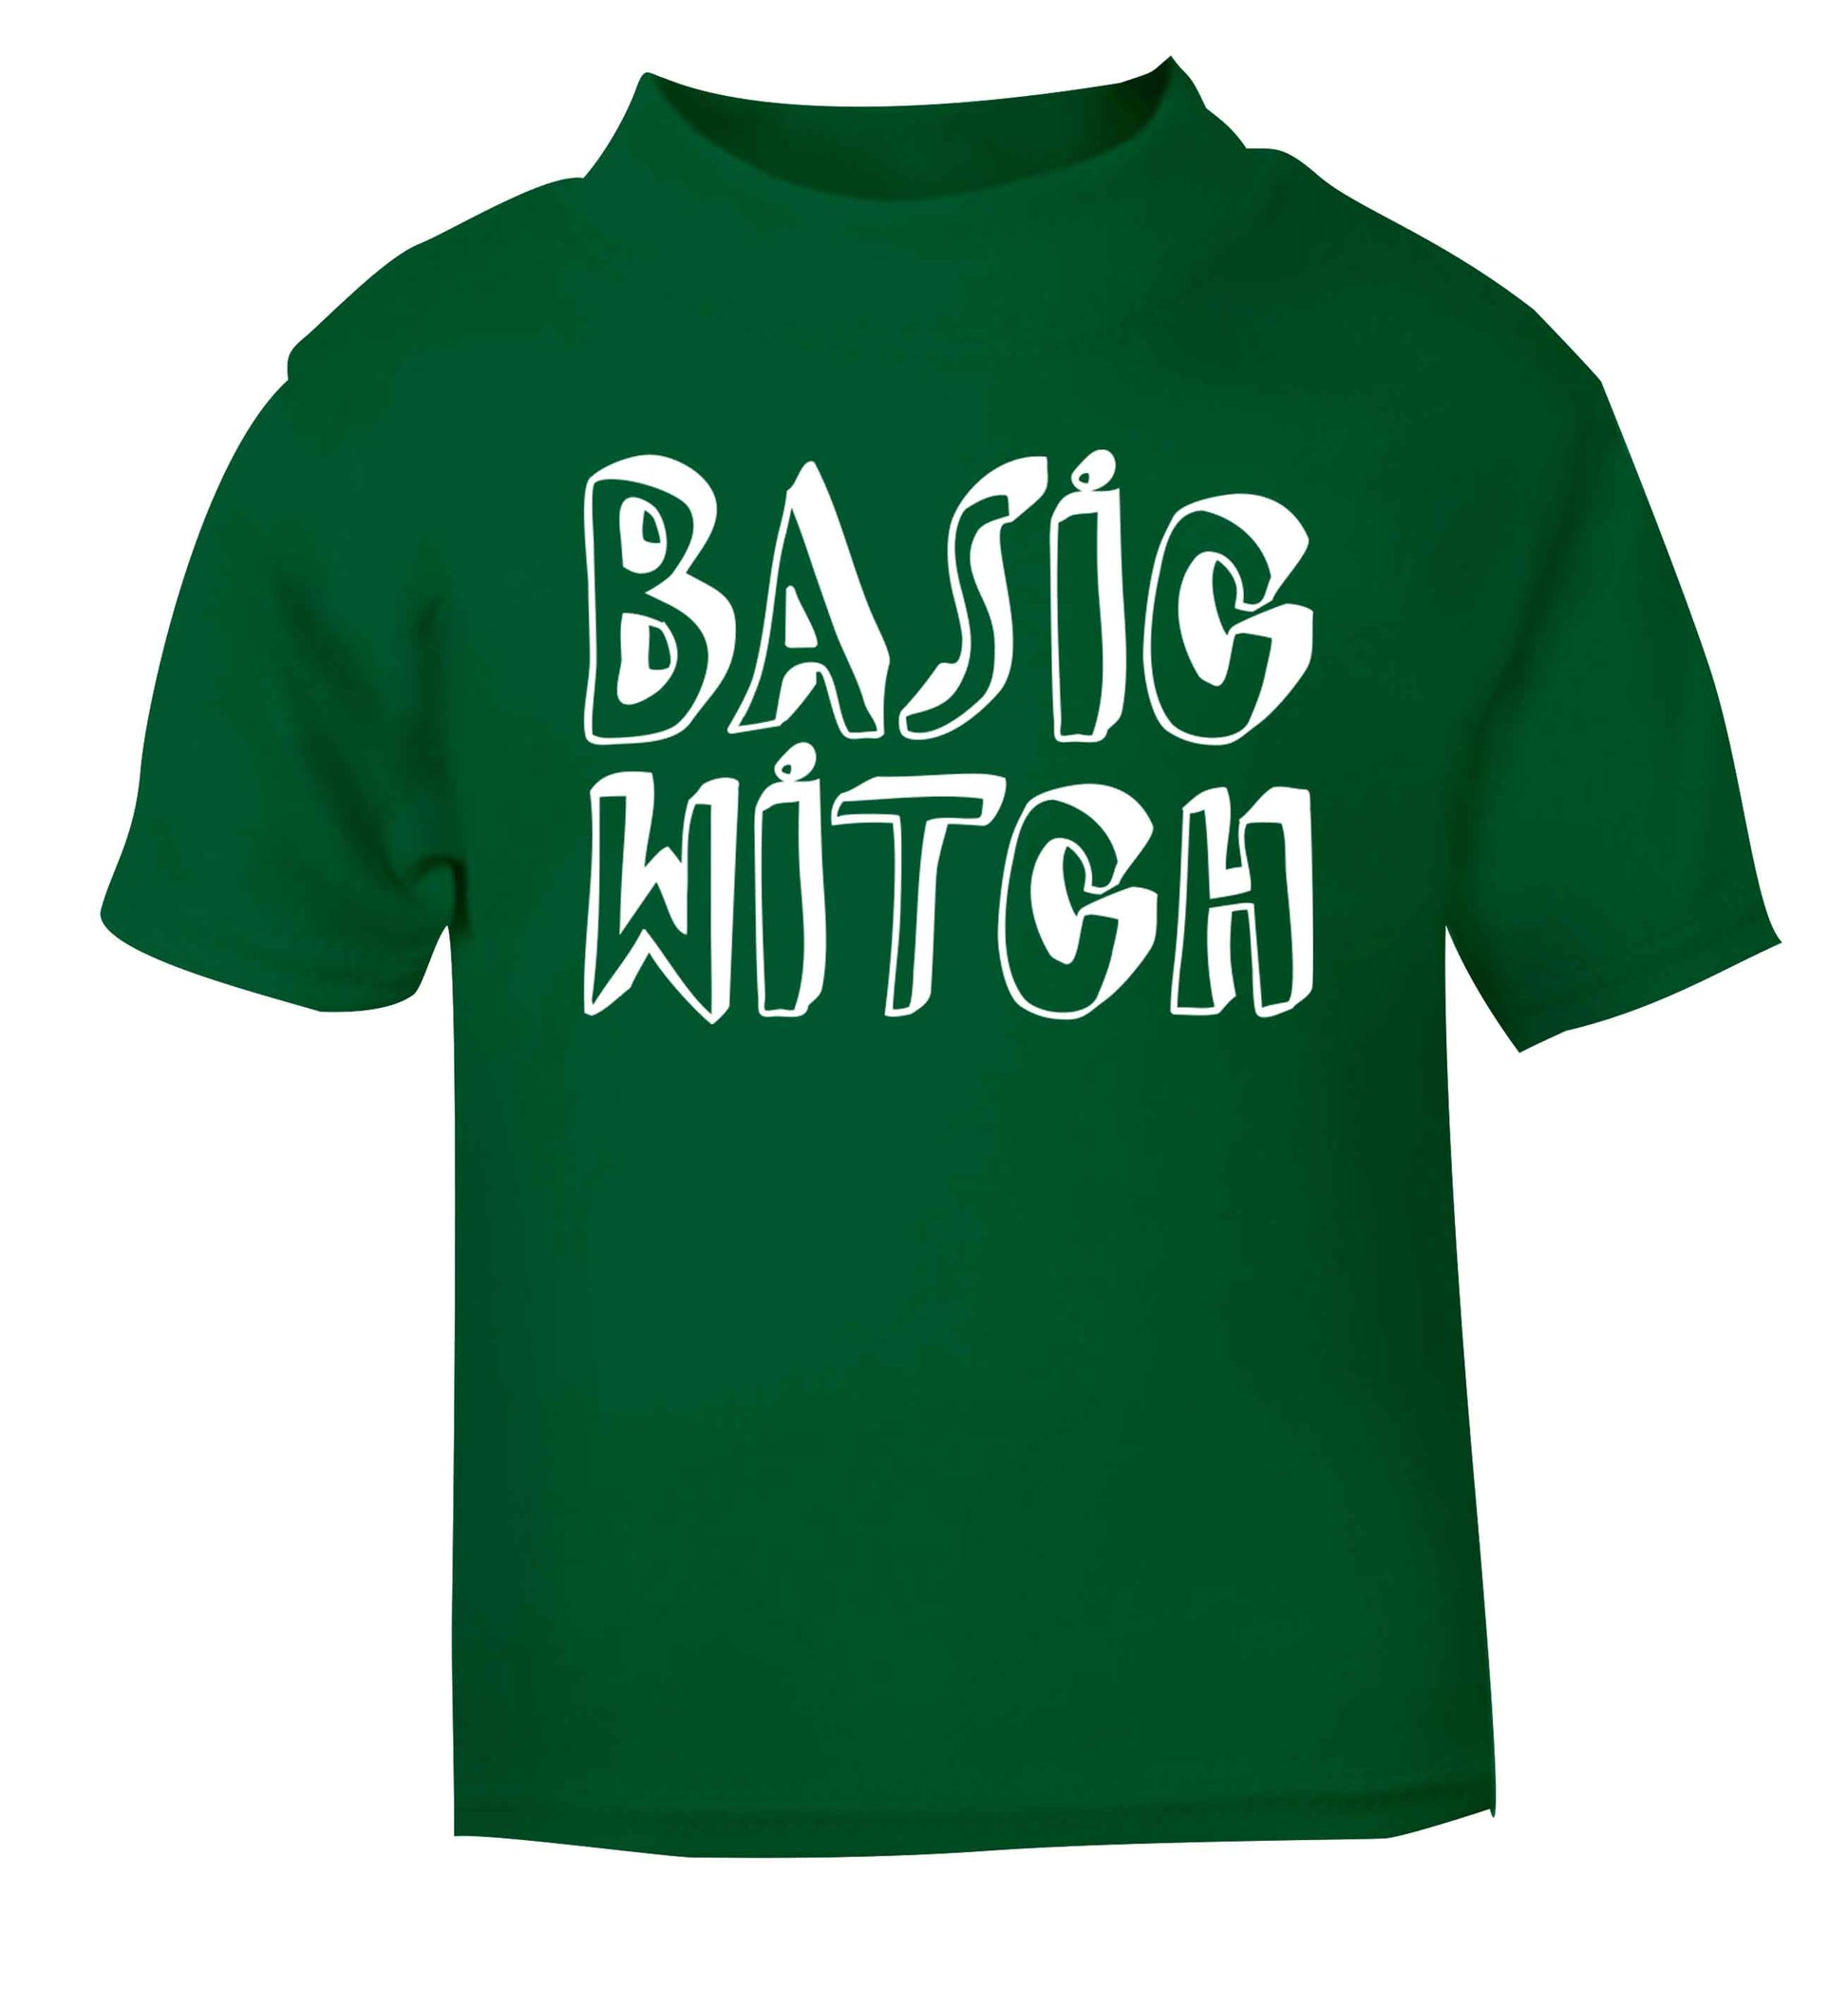 Basic witch green baby toddler Tshirt 2 Years